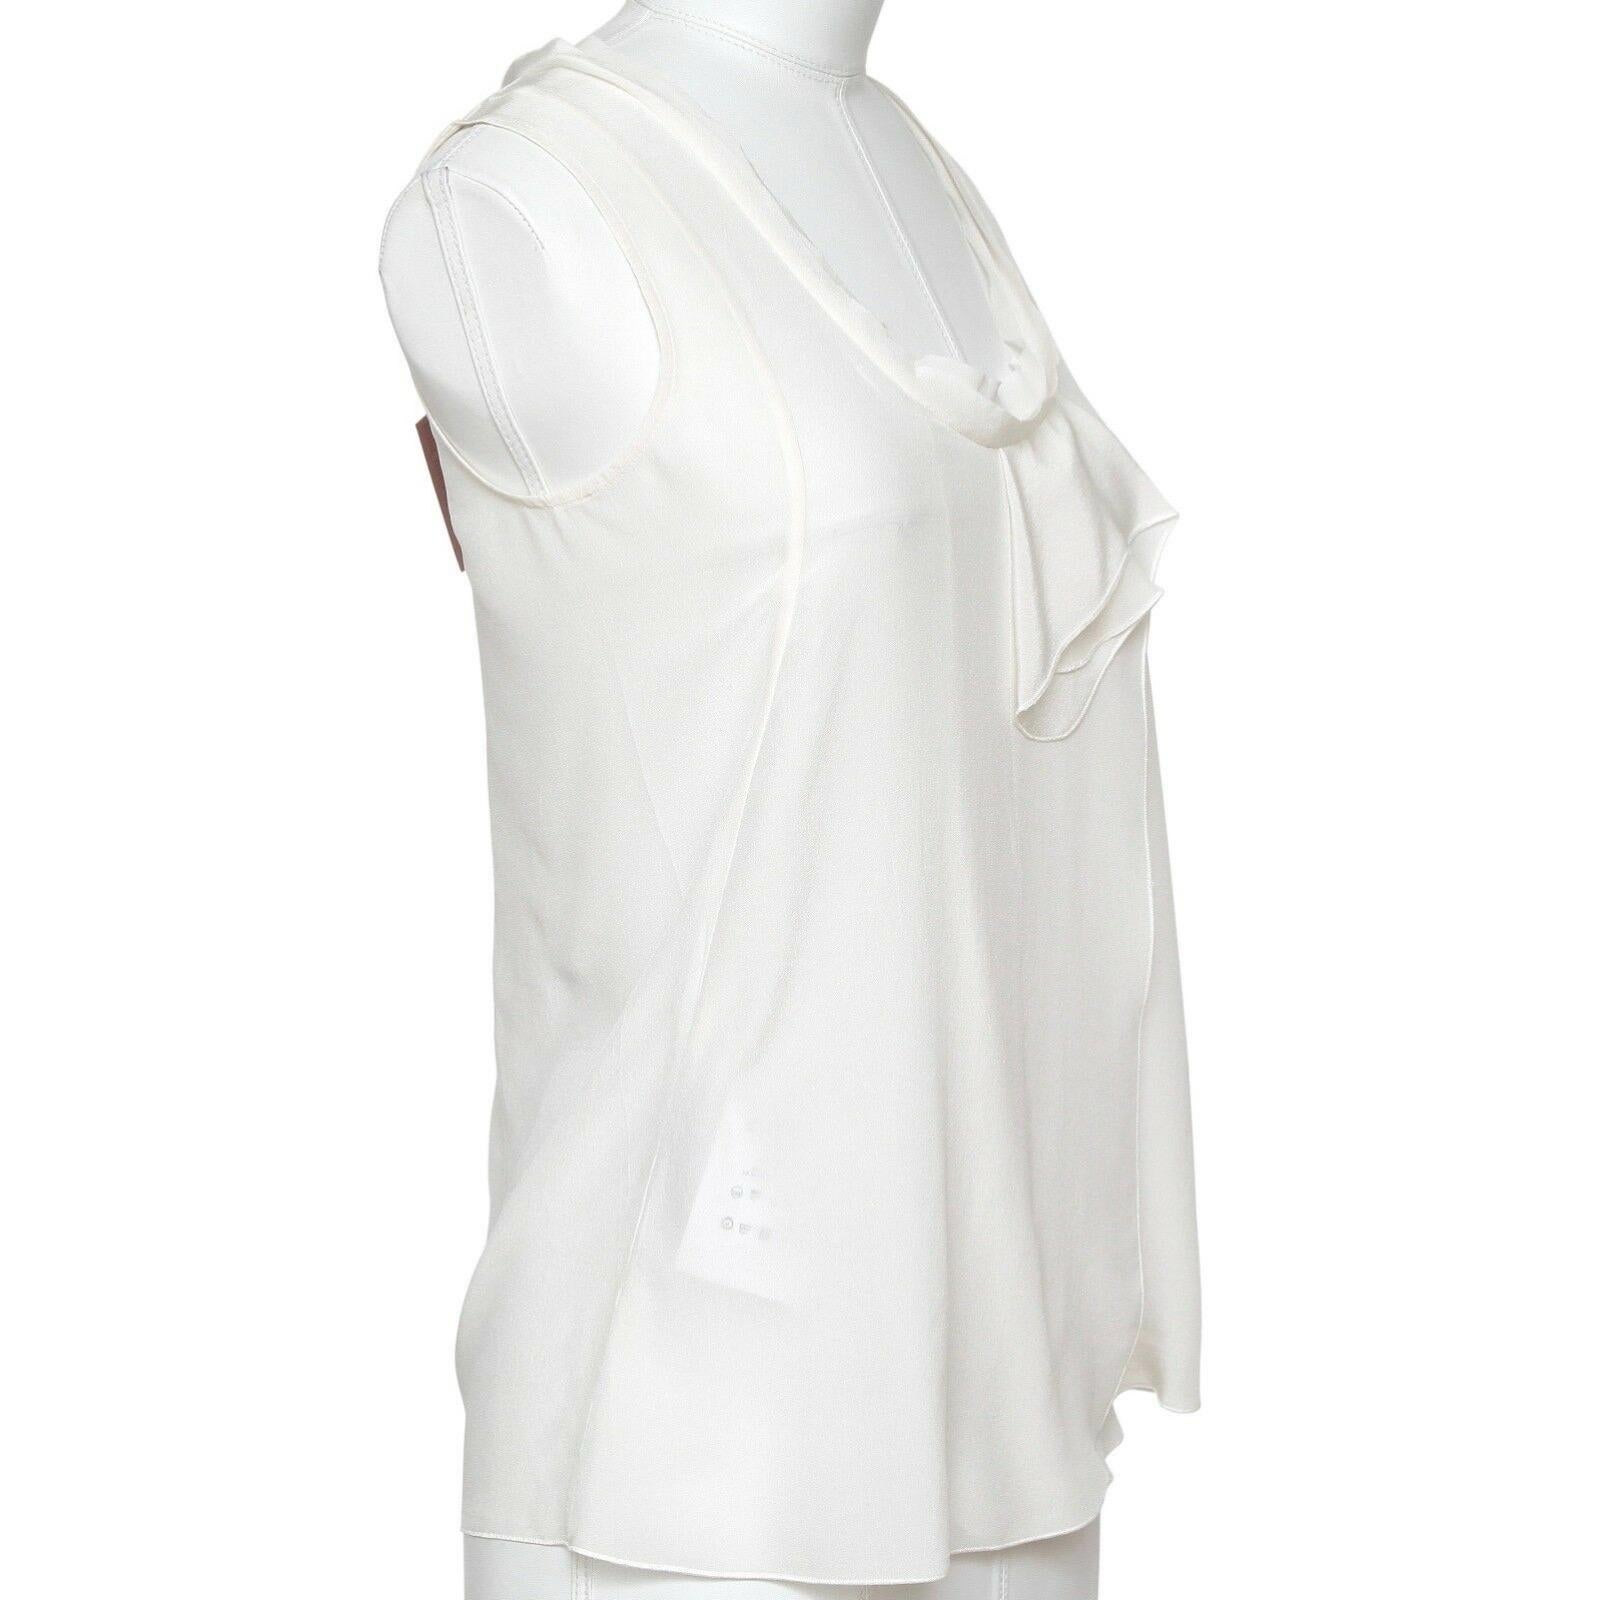 GUARANTEED AUTHENTIC MIU MIU IVORY SLEEVELESS SILK BLOUSE


Design:
- Classic sleeveless silk top in an ivory color (latte).
- Ruffle trim town front.
- Looks great w/jeans or under a jacket.
- Slip on.
- Unlined. 
Size: 36

Material: 100% Silk